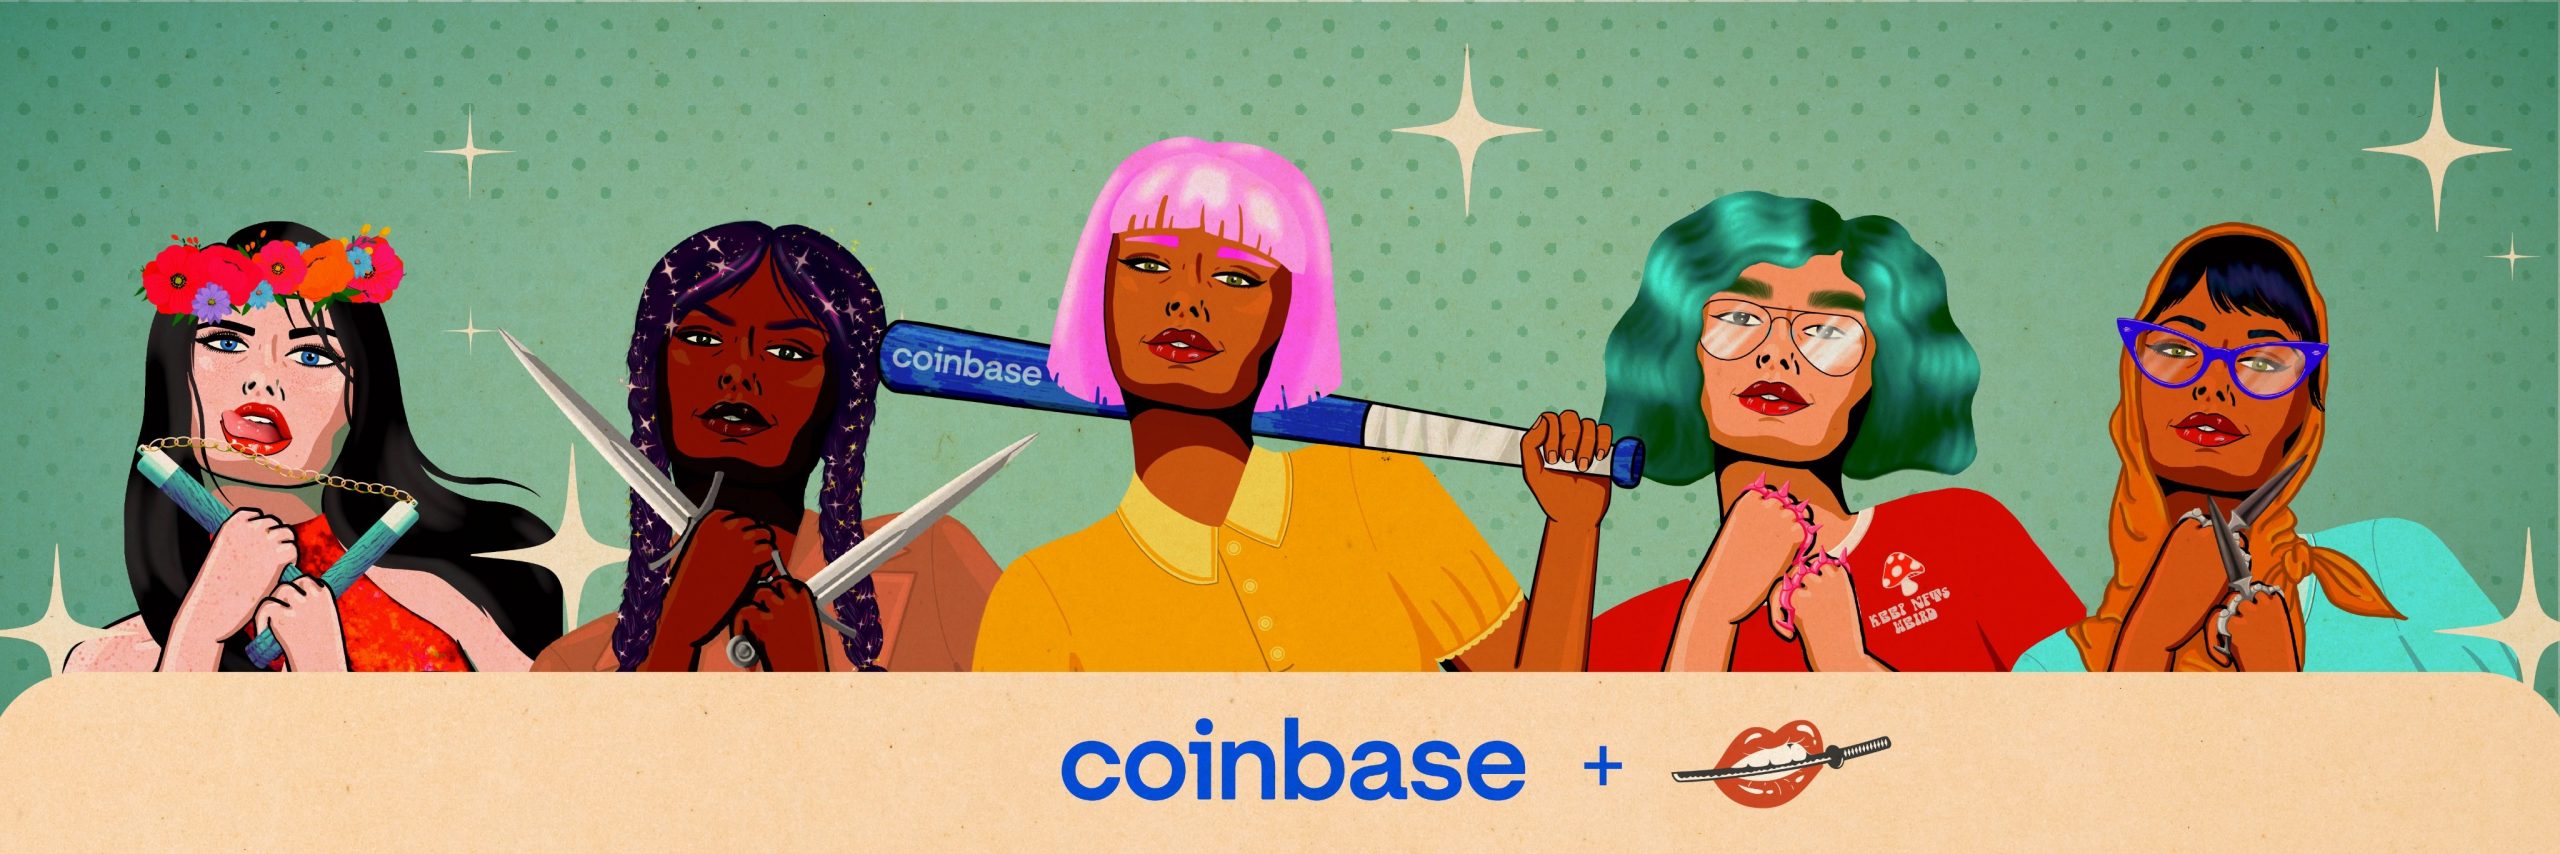 The picture shows an artwork by Women and Weapons on the Coinbase NFT Marketplace